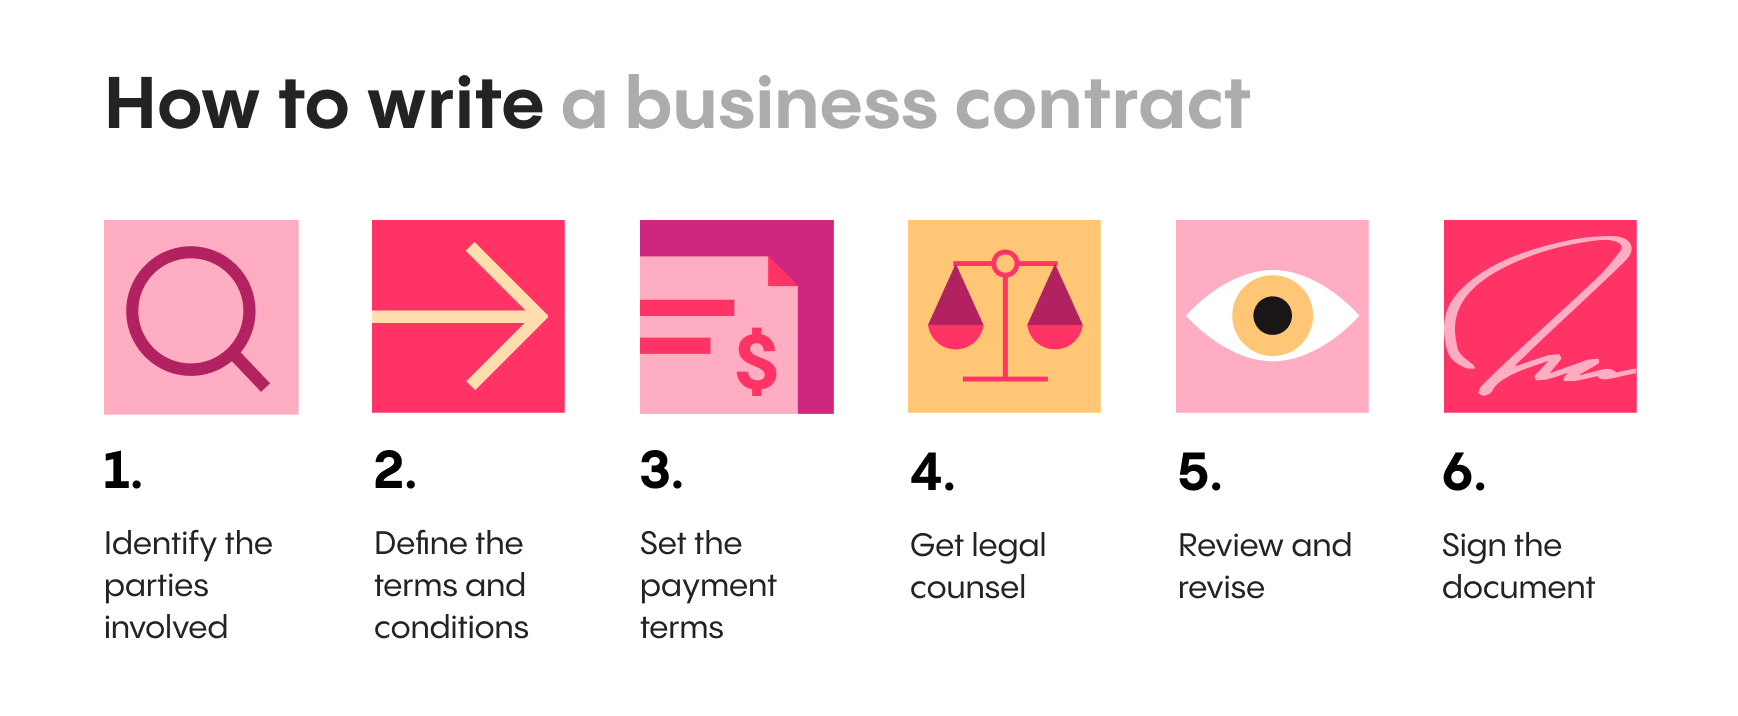 Horizontal infographic depicting how to write a business contract. It shows six steps. Each step has an image and a description. Step 1 - identify the parties involved. Step 2 - define the terms and conditions. 3 - set the payment terms. 4 - get legal counsel. 5 - review and revise. 6 - sign the document. 